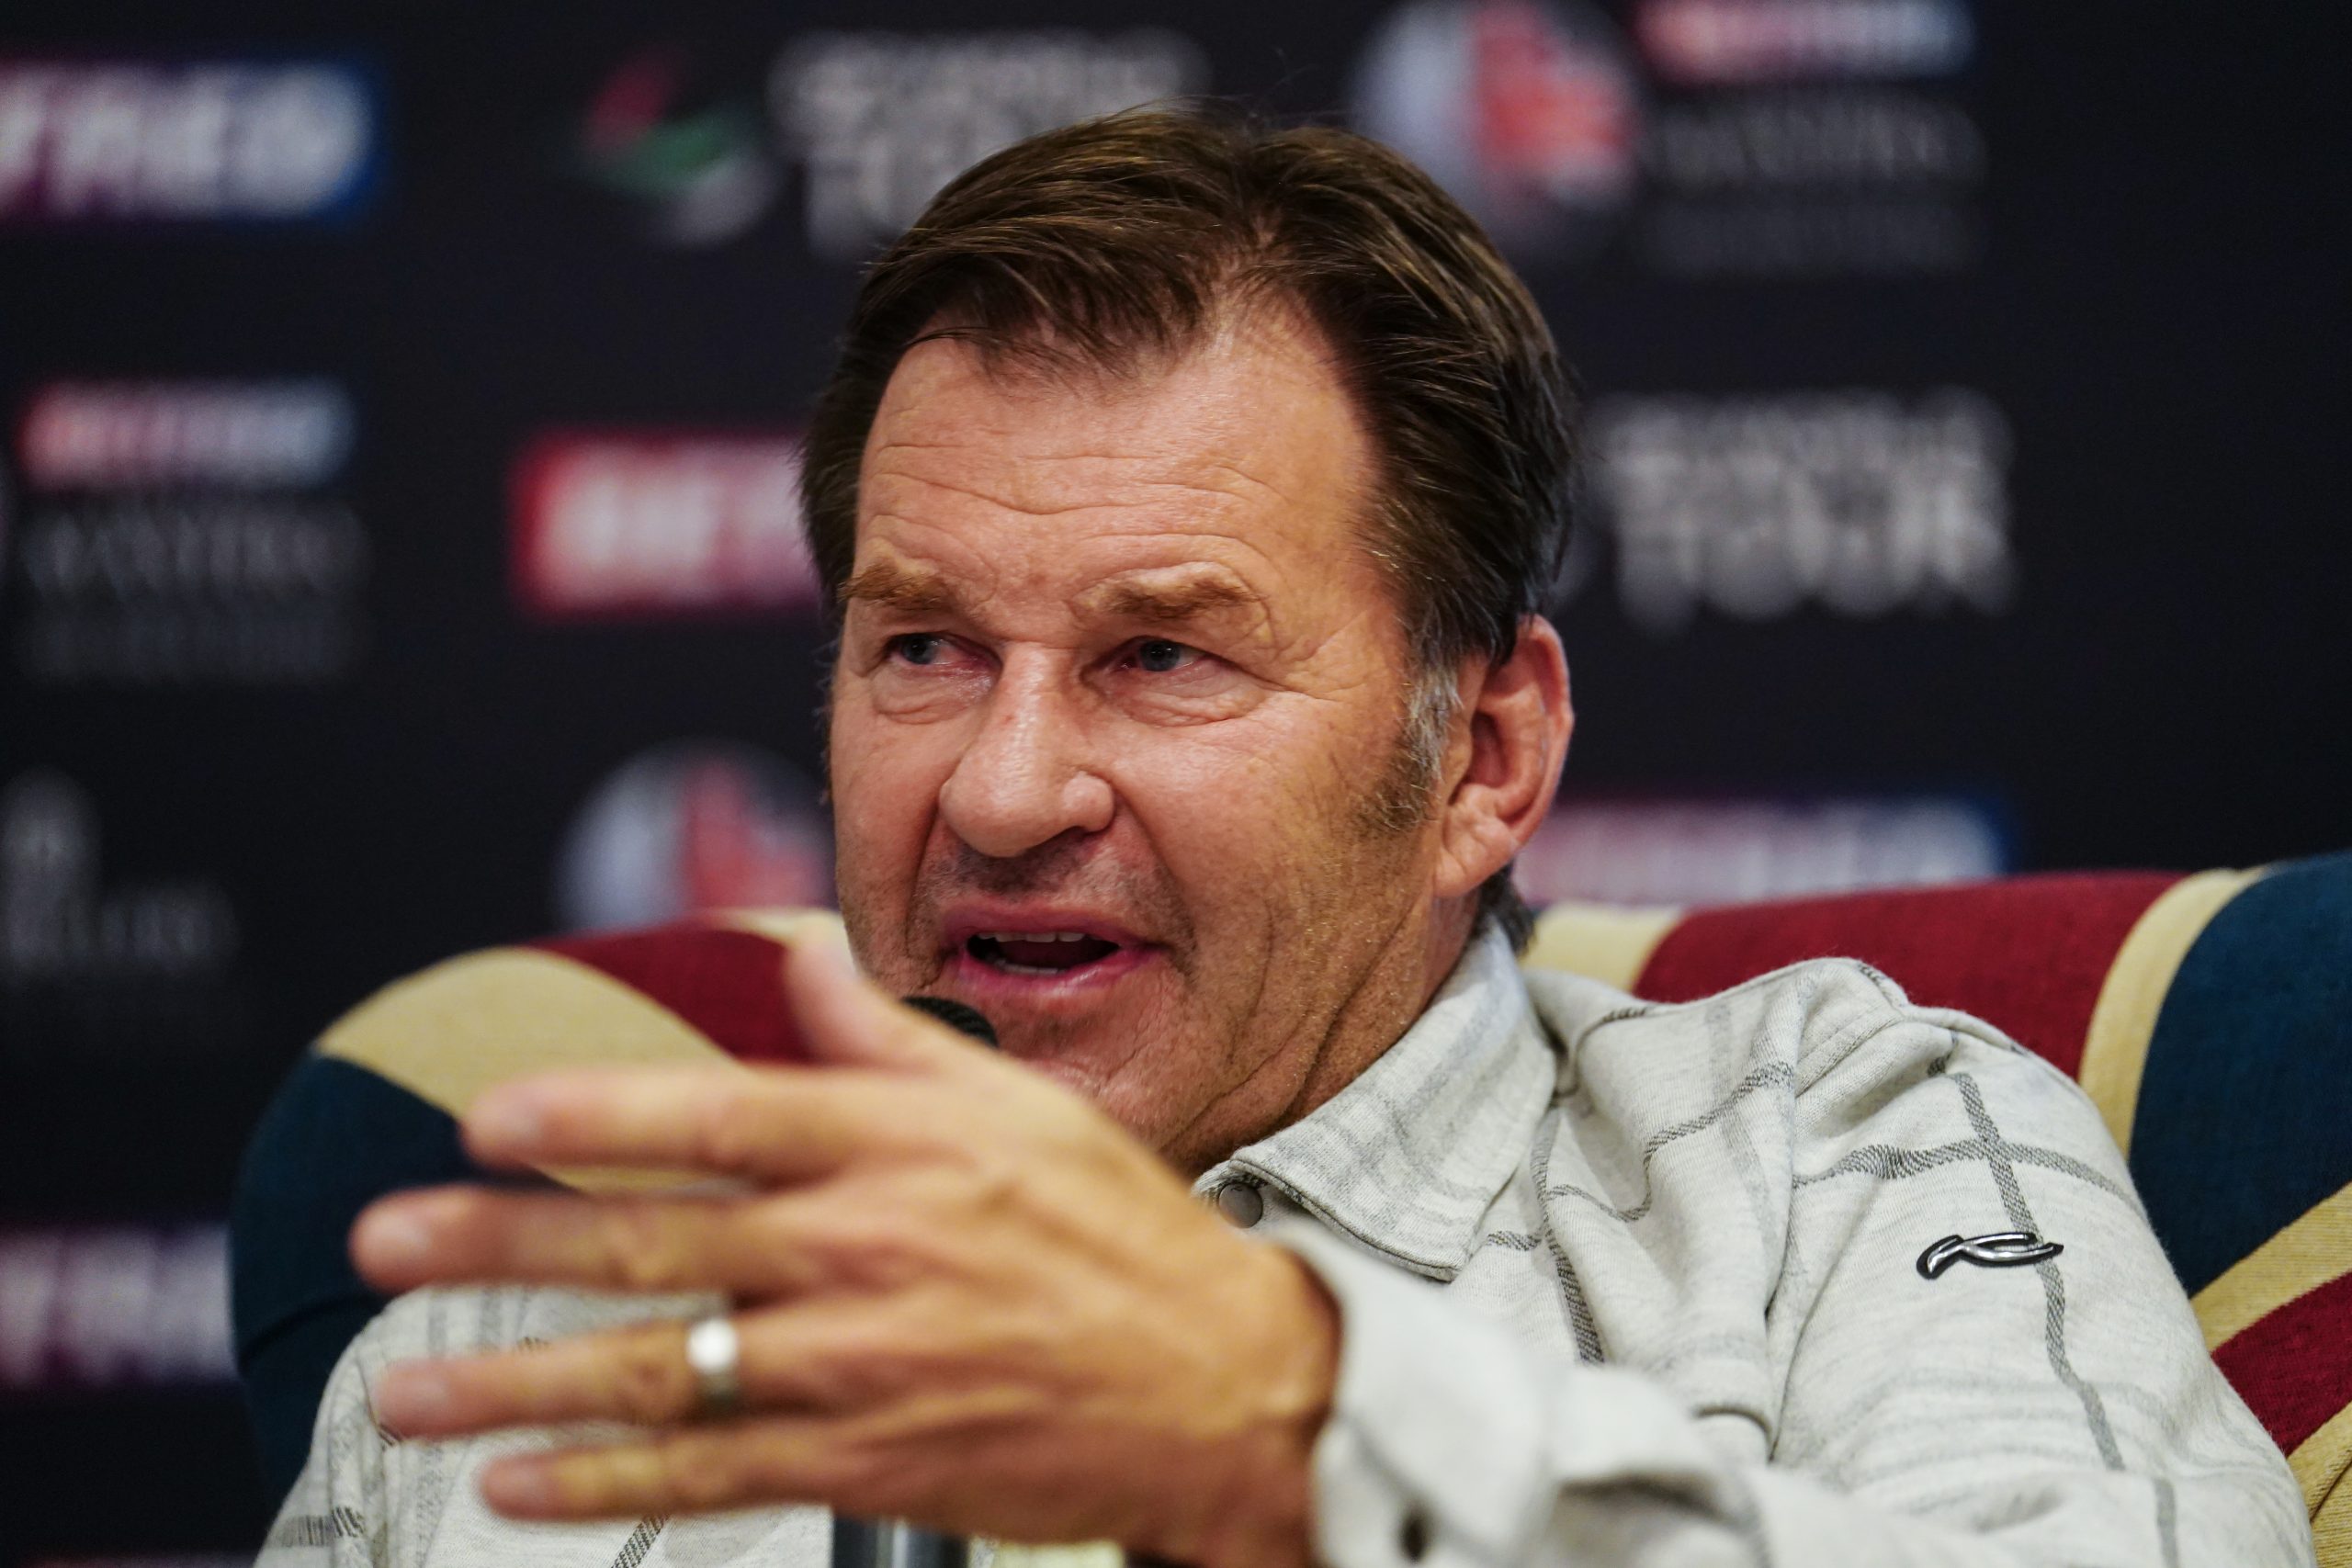 Sir Nick Faldo: LIV Golf won’t survive proposed deal with governing bodies